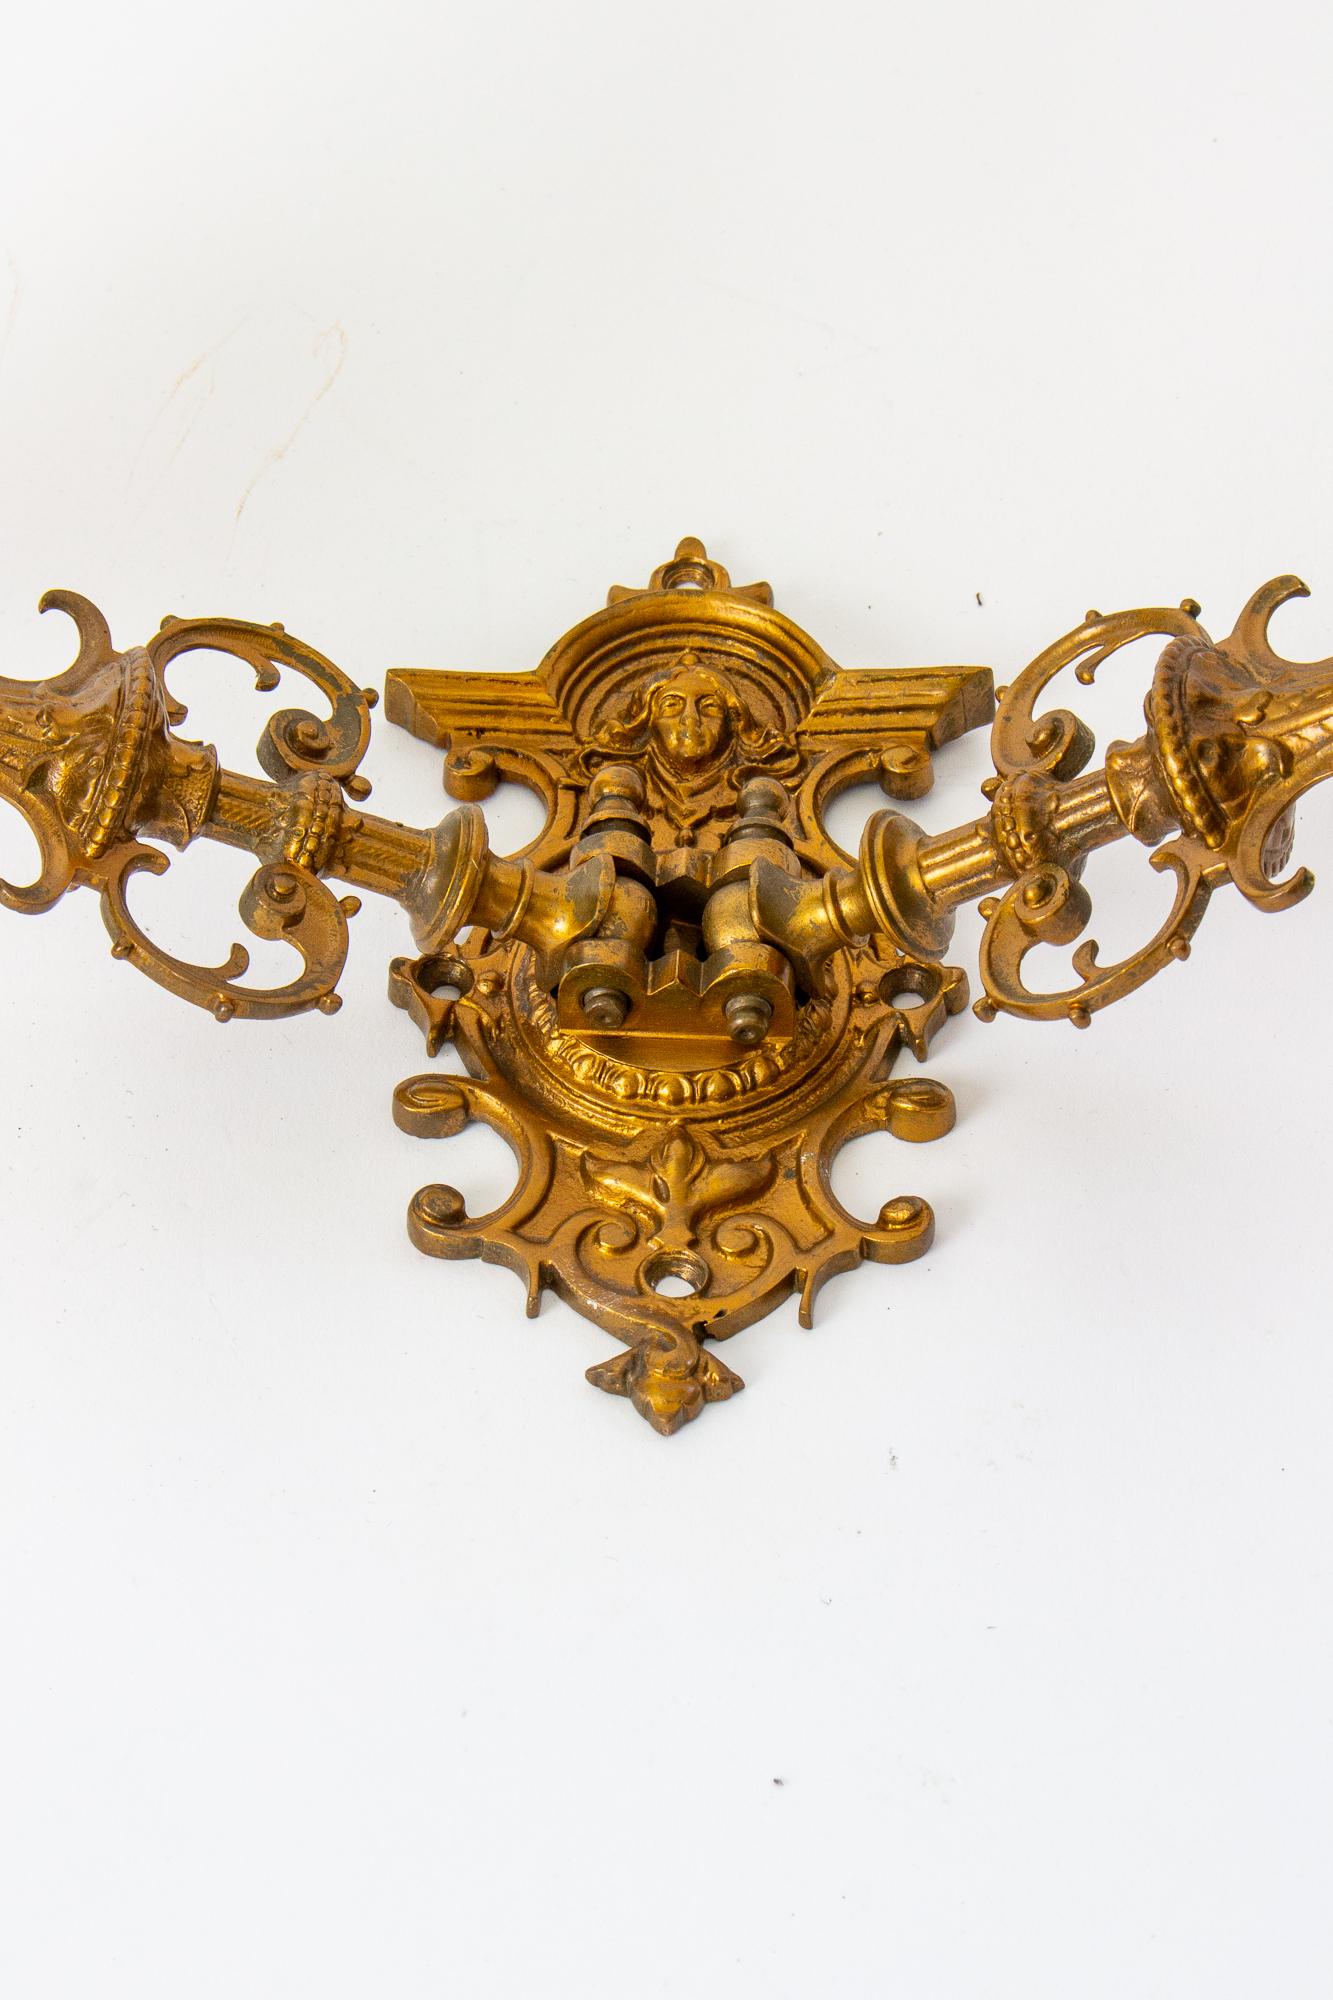 A pair of victorian swivel arm sconces. Gothic Revival style, with two arms. Onate throughout, the backplate features a womans face. Cast bronze, with an aged gilt finish. For candles. C. 1860.